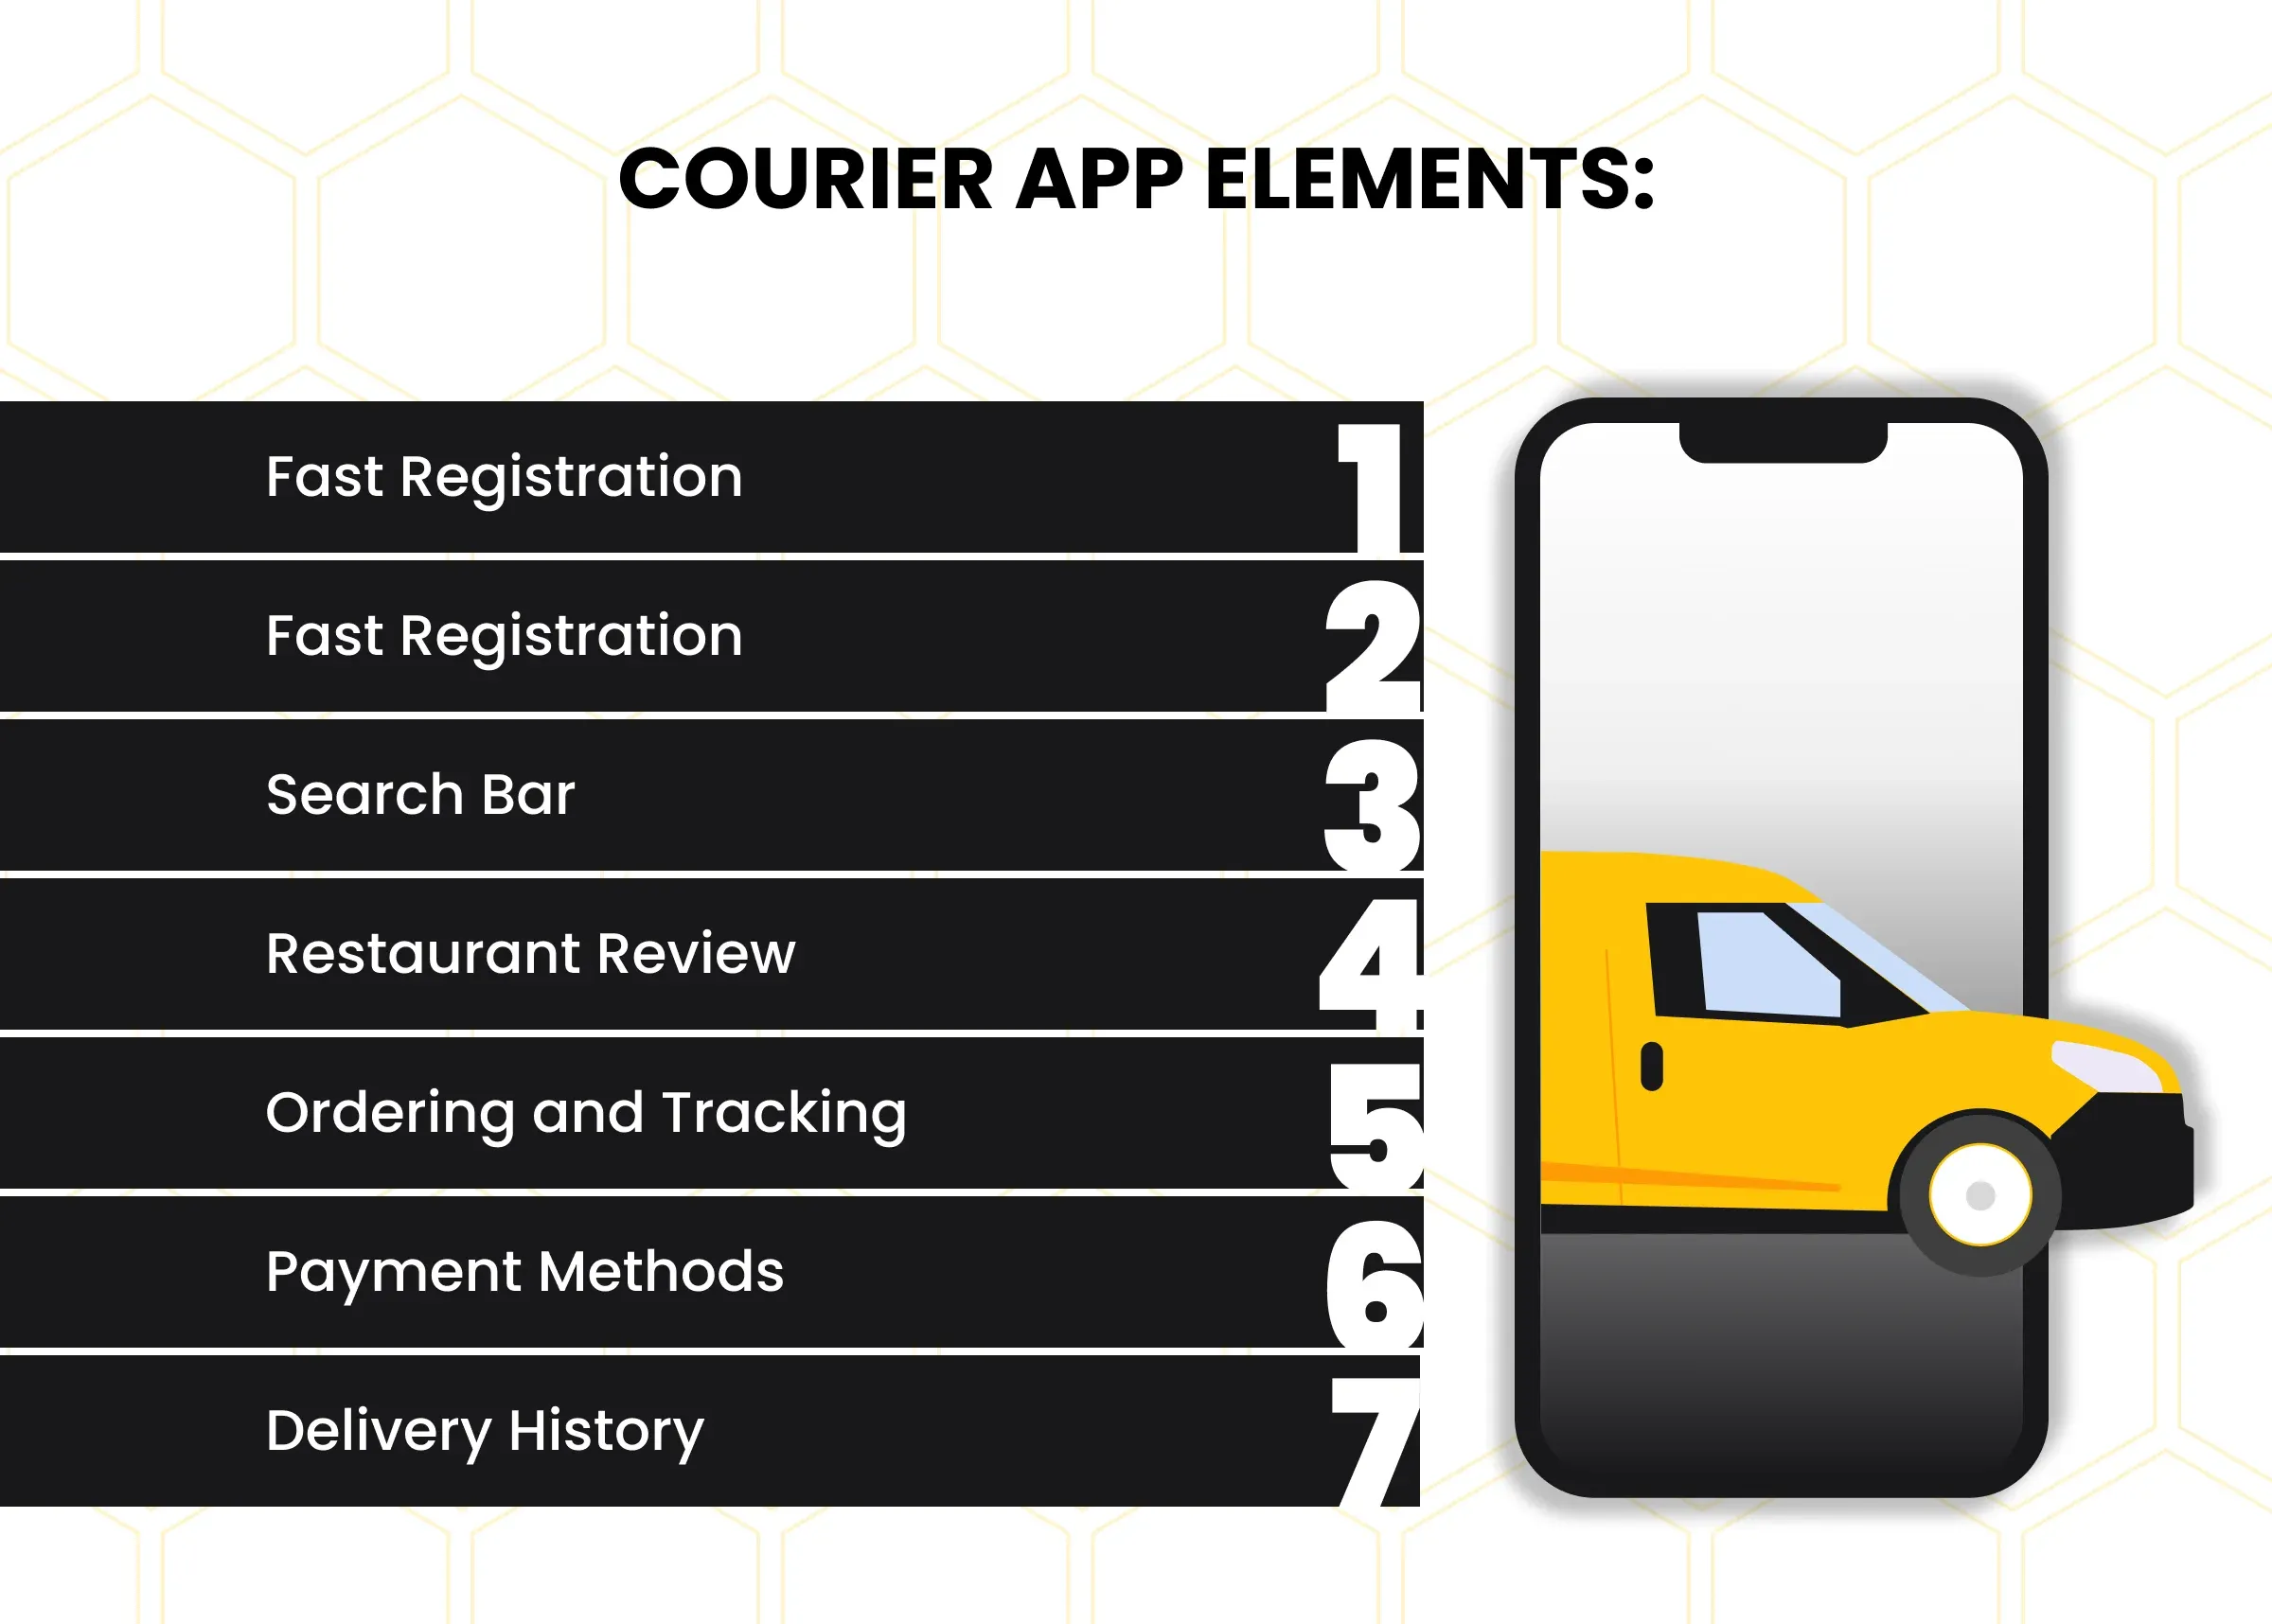 Must-have elements of Courier App